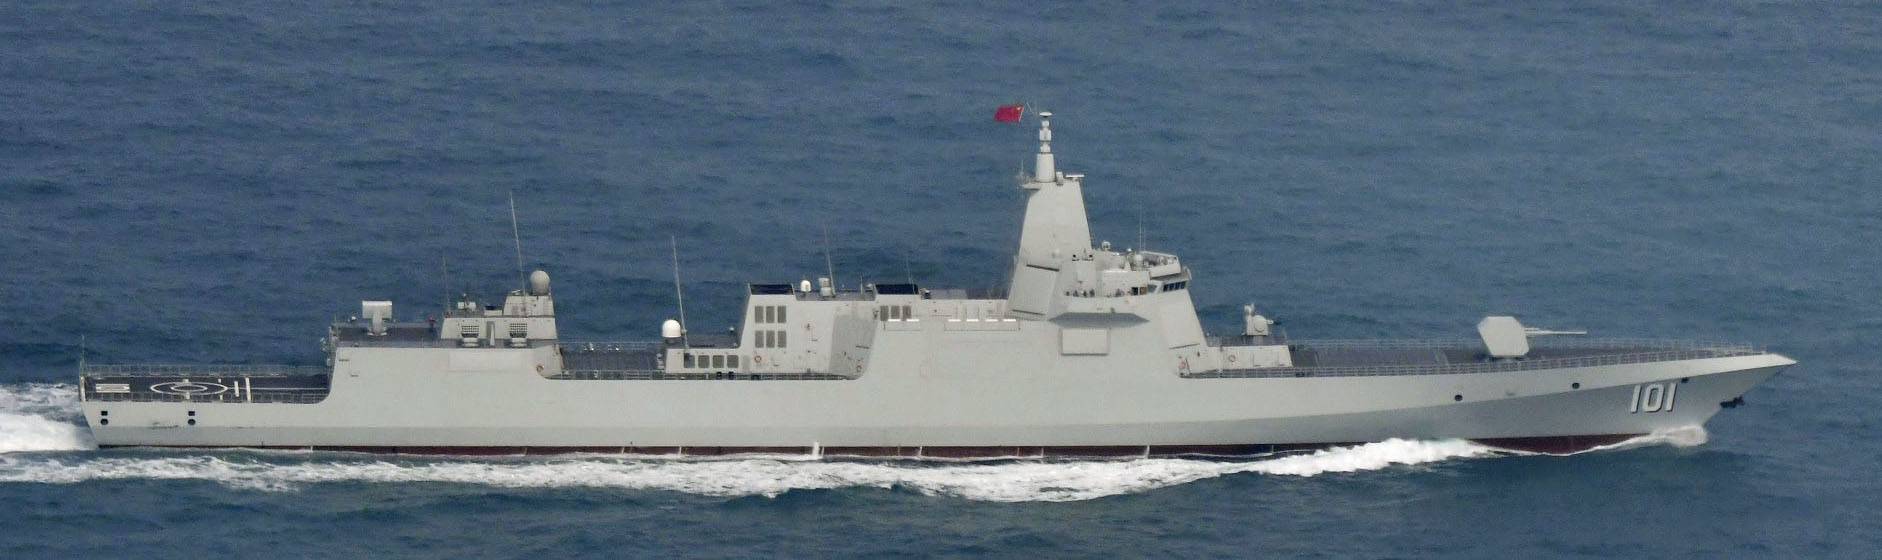 The Chinese Navy's Renhai-class destroyer is seen sailing in waters near Japan recently. | DEFENSE MINISTRY